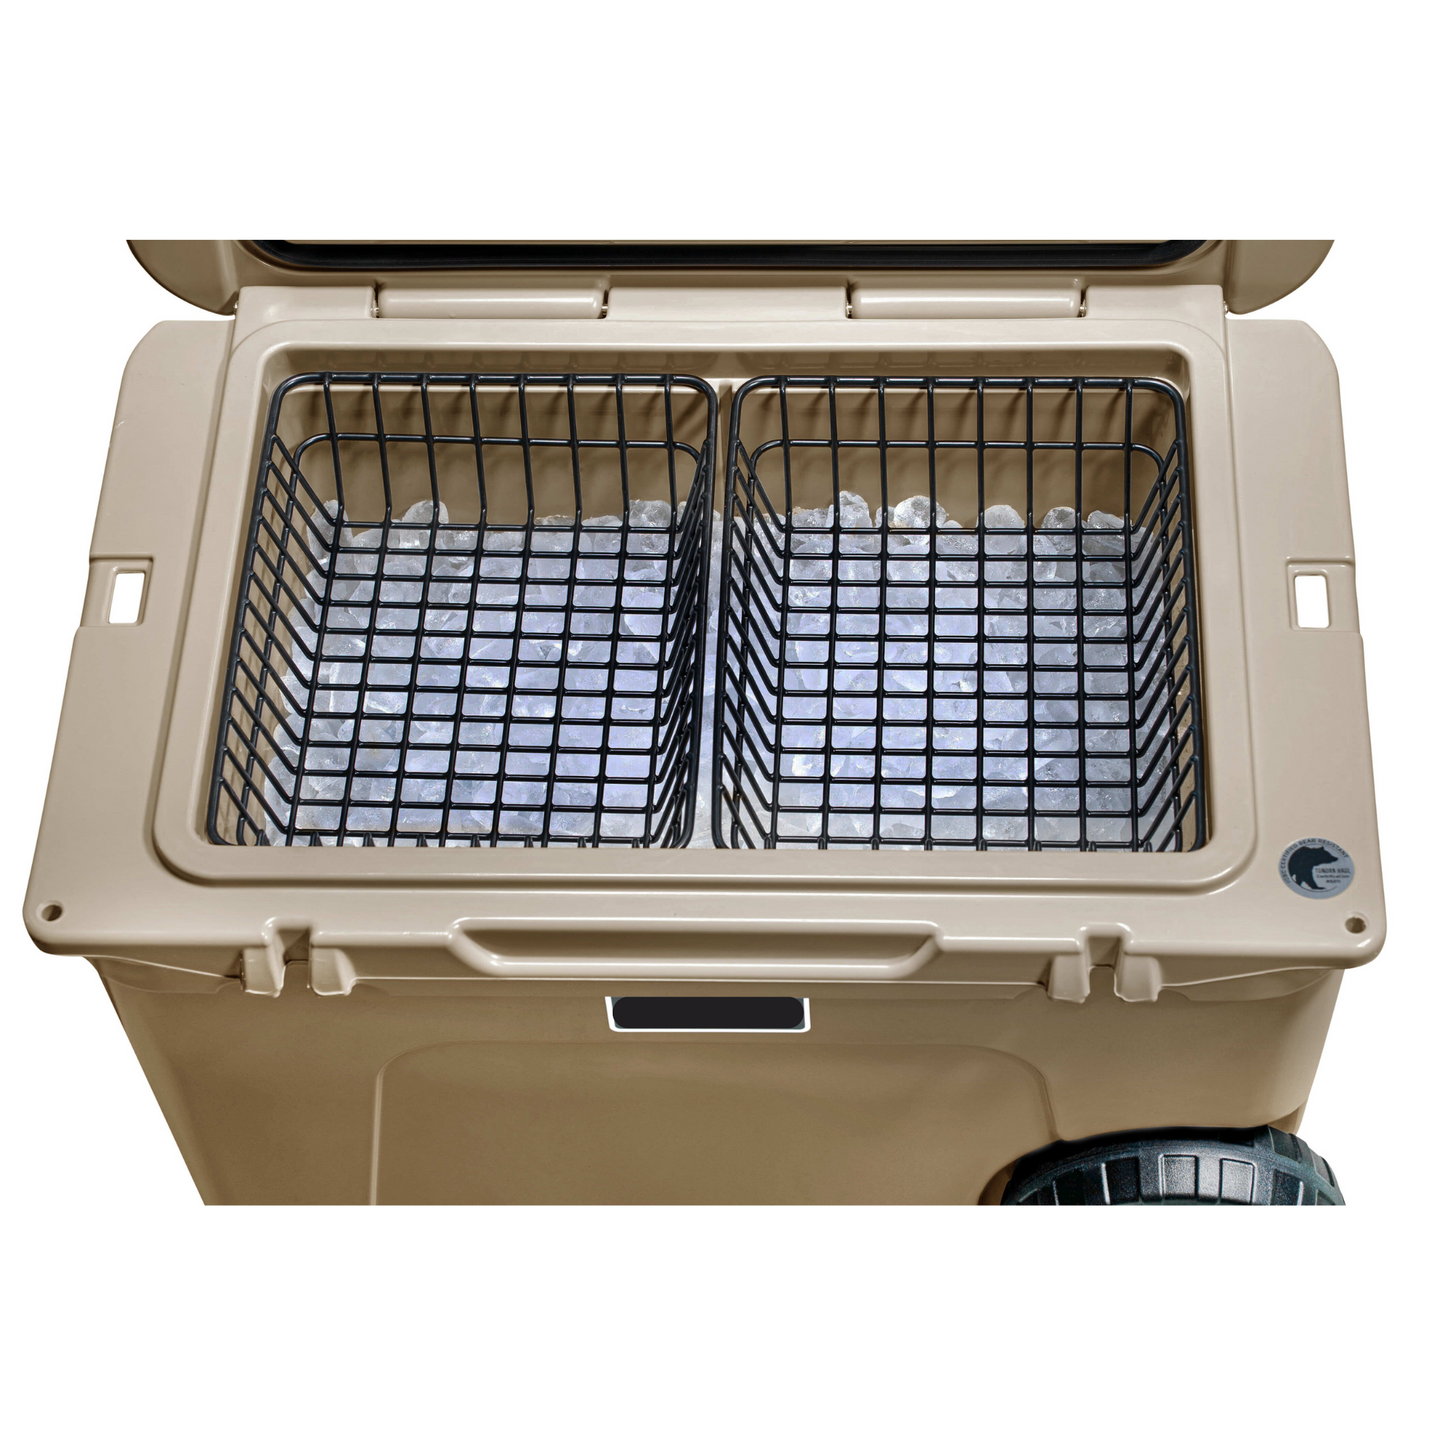 High 'N Dry Cooler Basket for YETI Wheeled Coolers